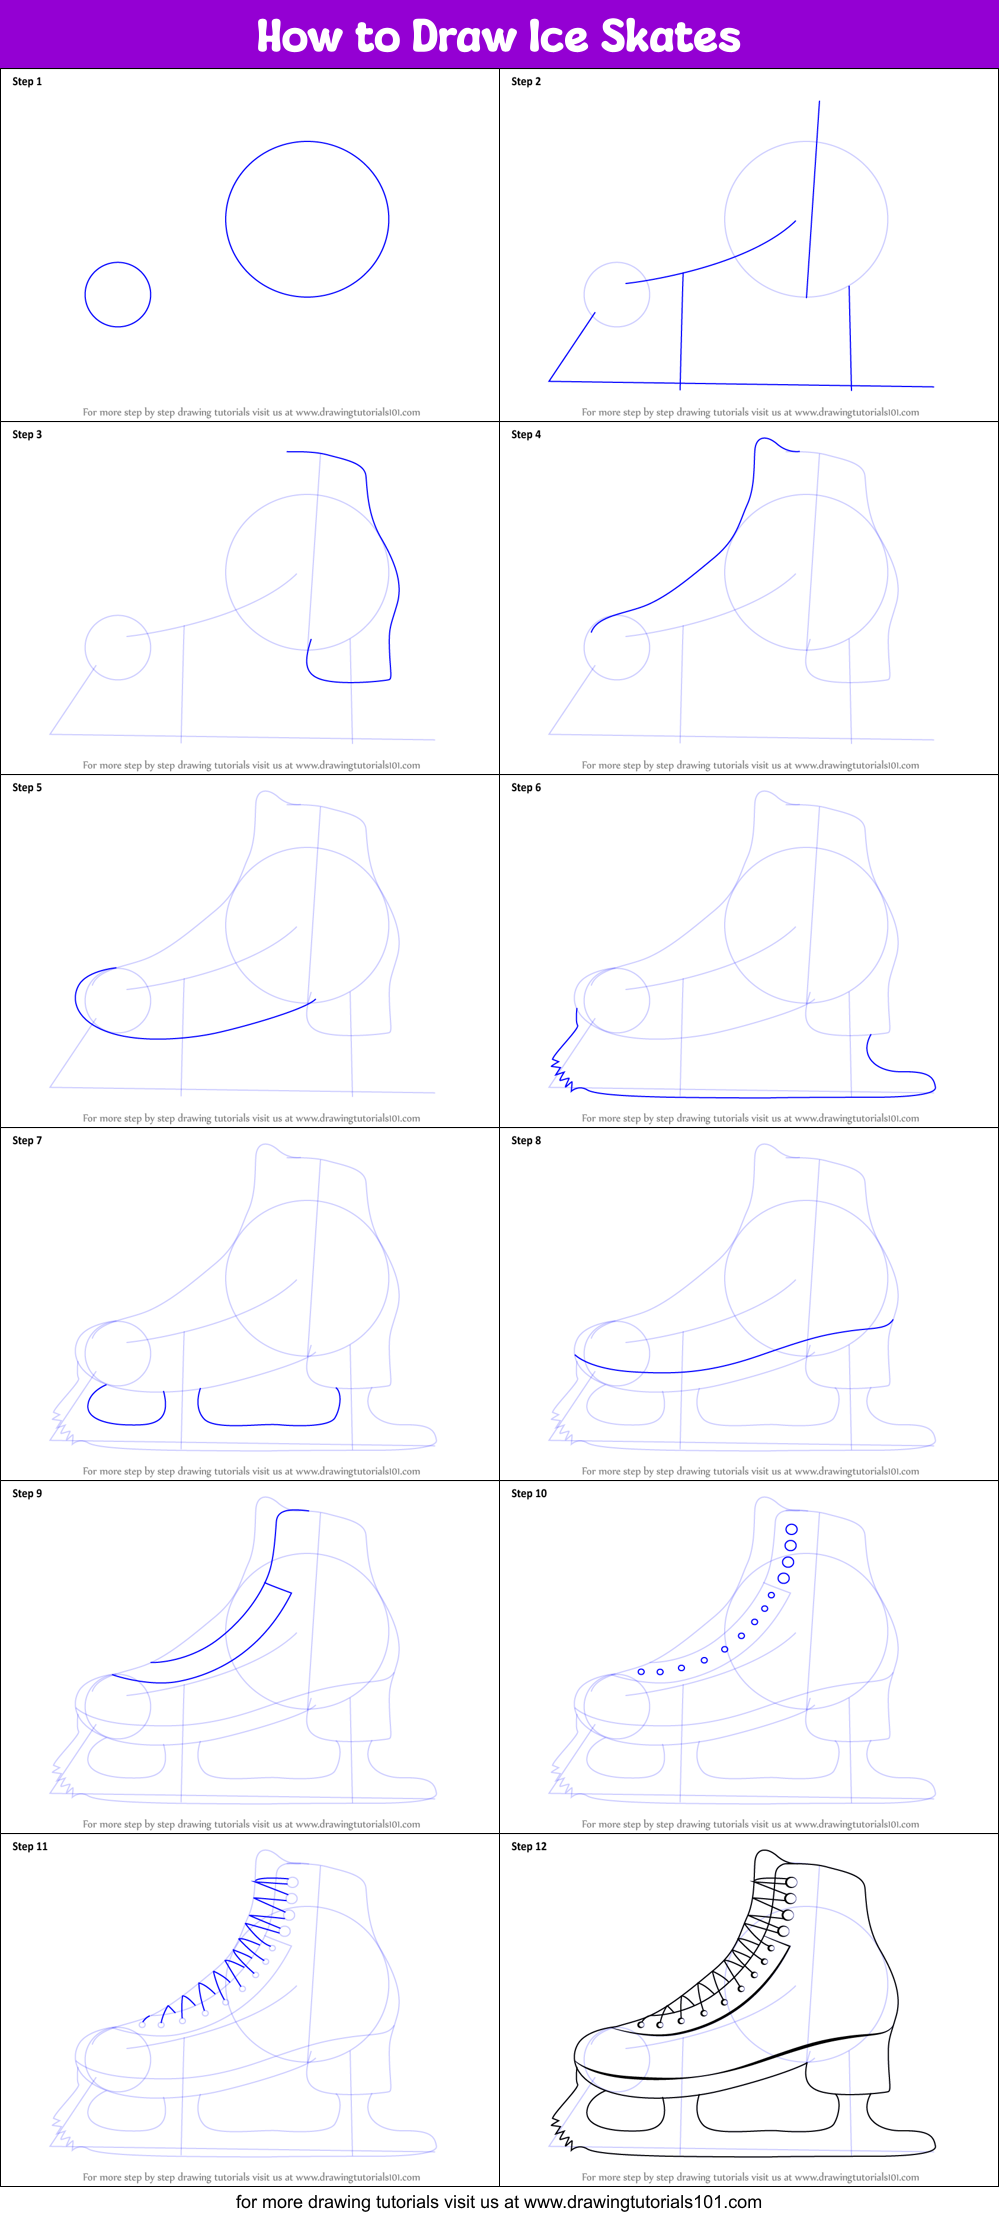 How to Draw Ice Skates printable step by step drawing sheet